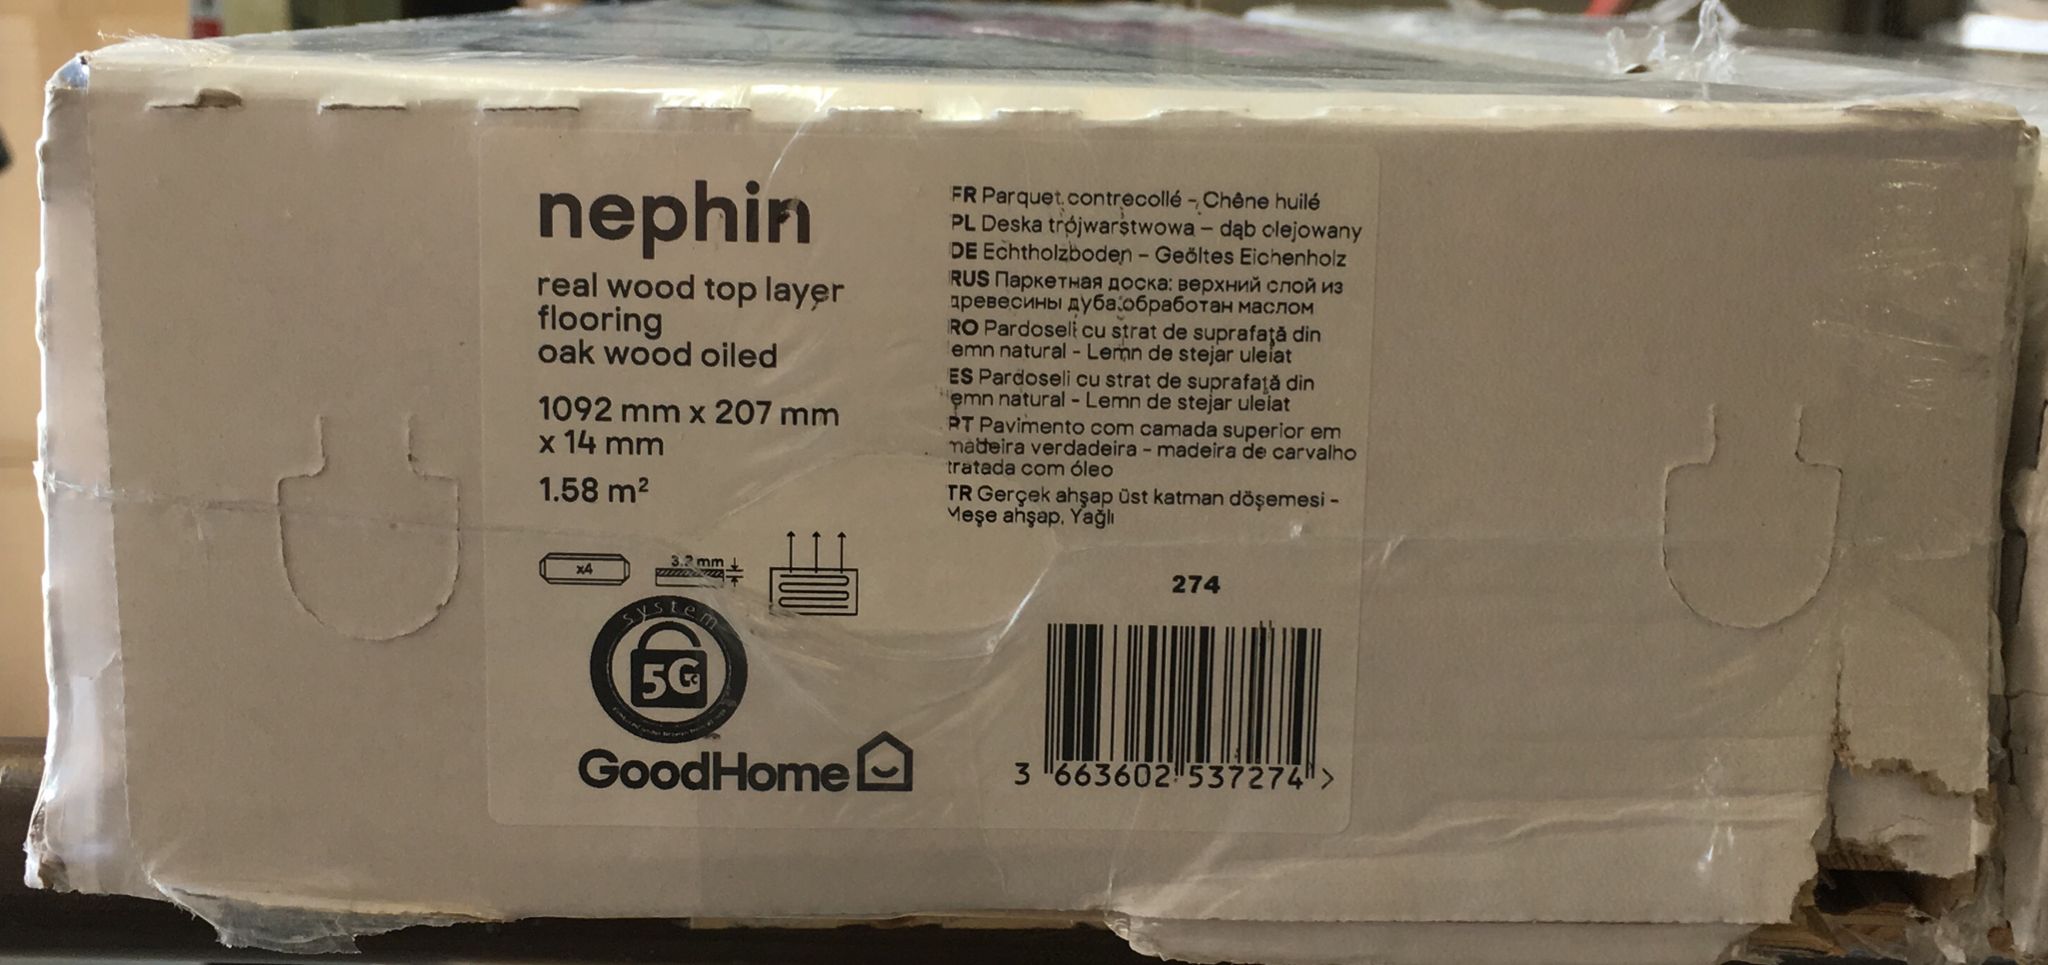 GoodHome Nephin Grey Oak Real wood top layer flooring, 1.58m² Pack 7274